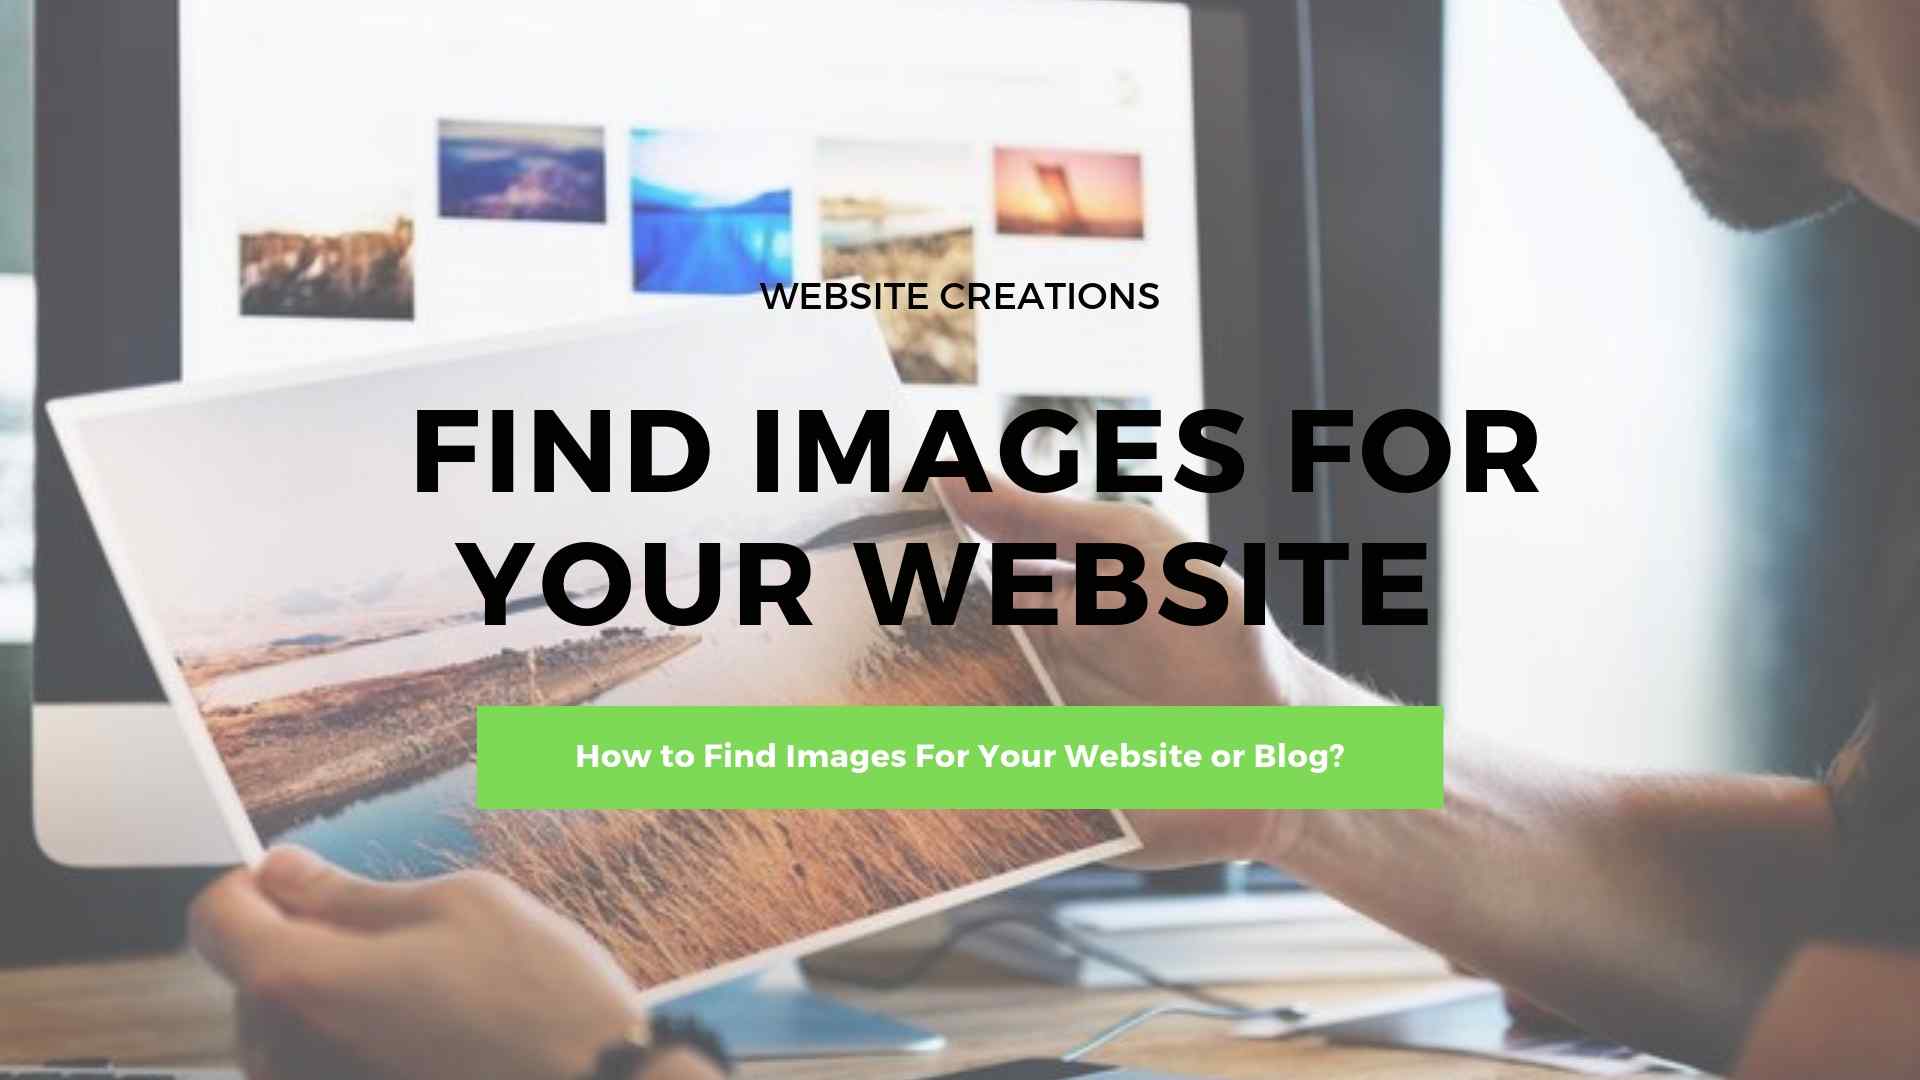 How to Find Images For Your Website or Blog